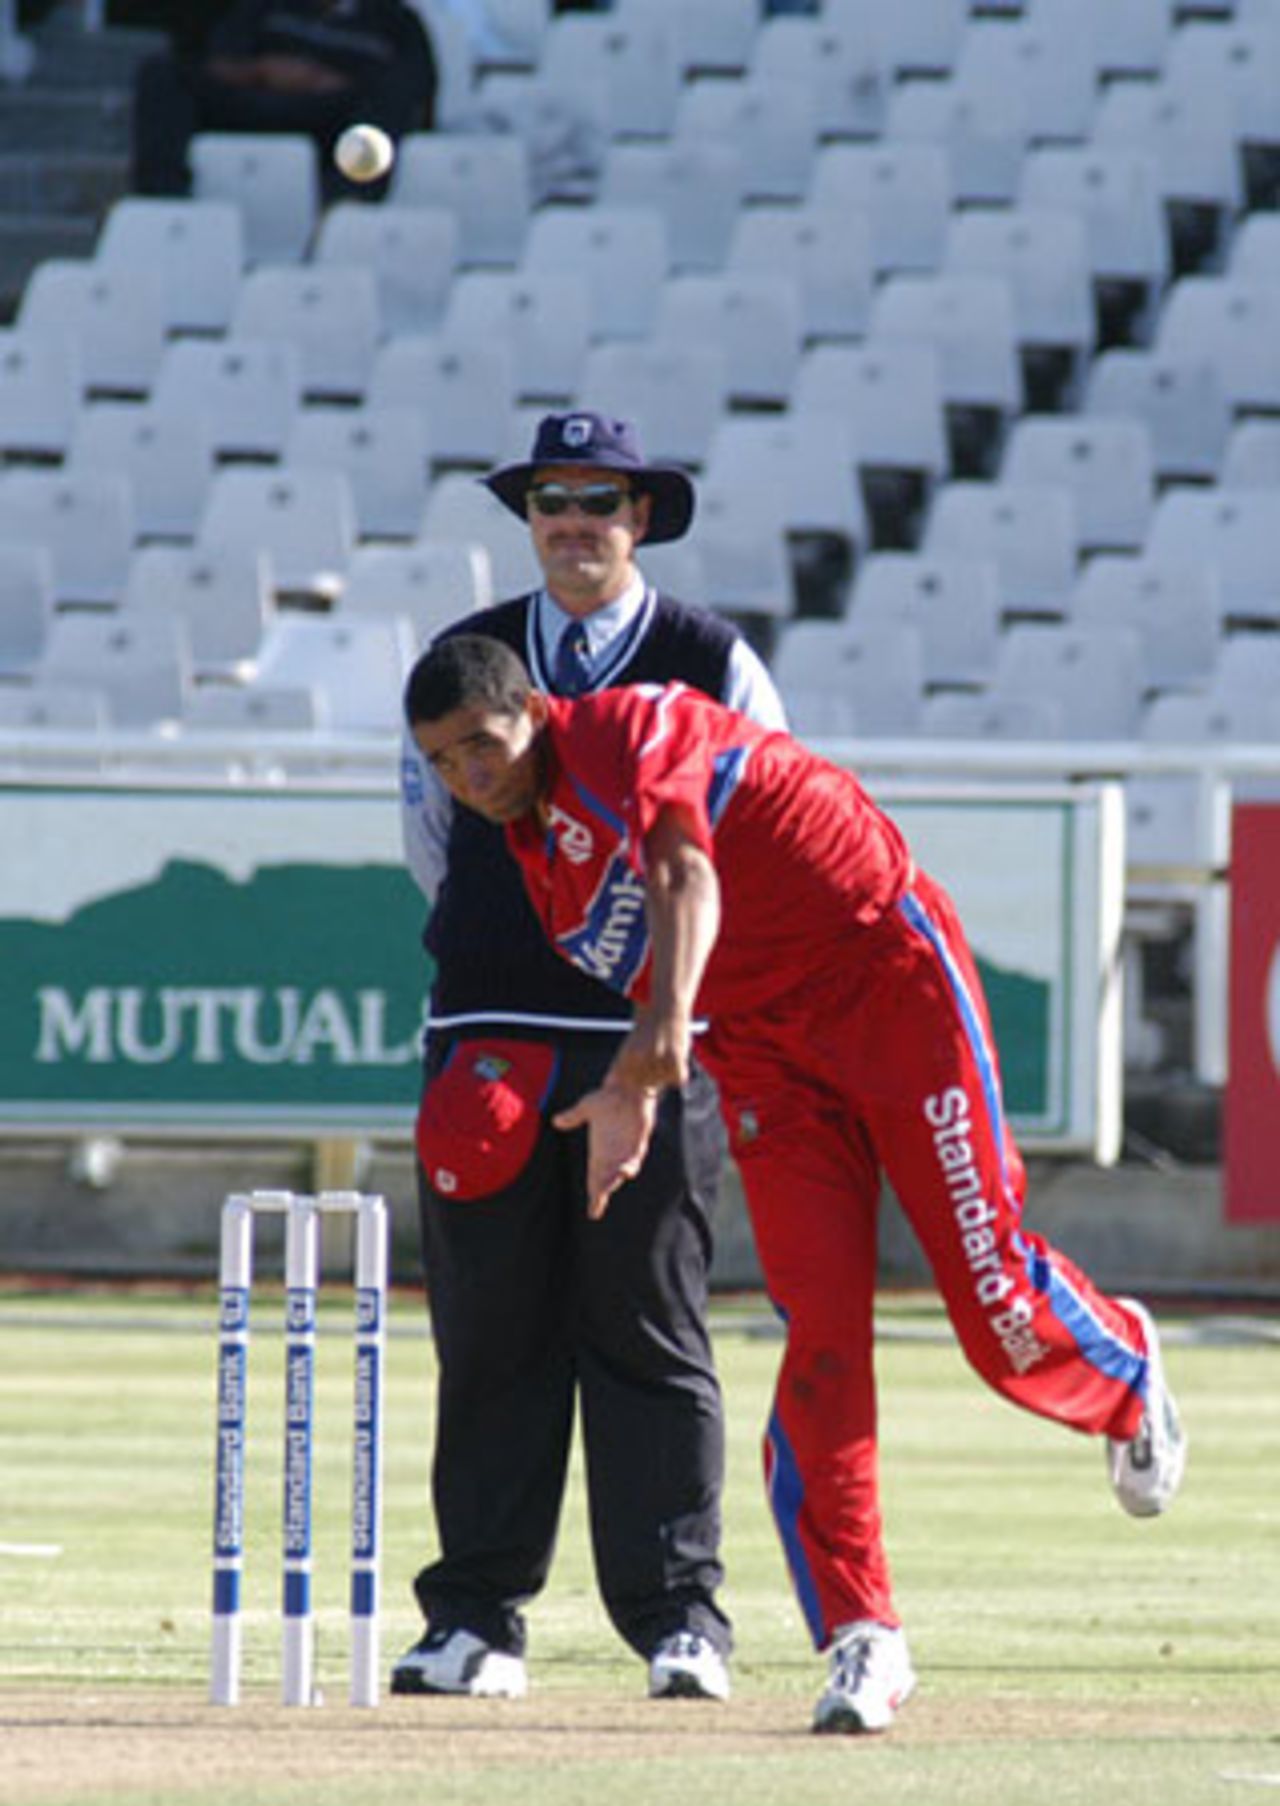 Robin Peterson of EP sends down a ball against WP at Newlands